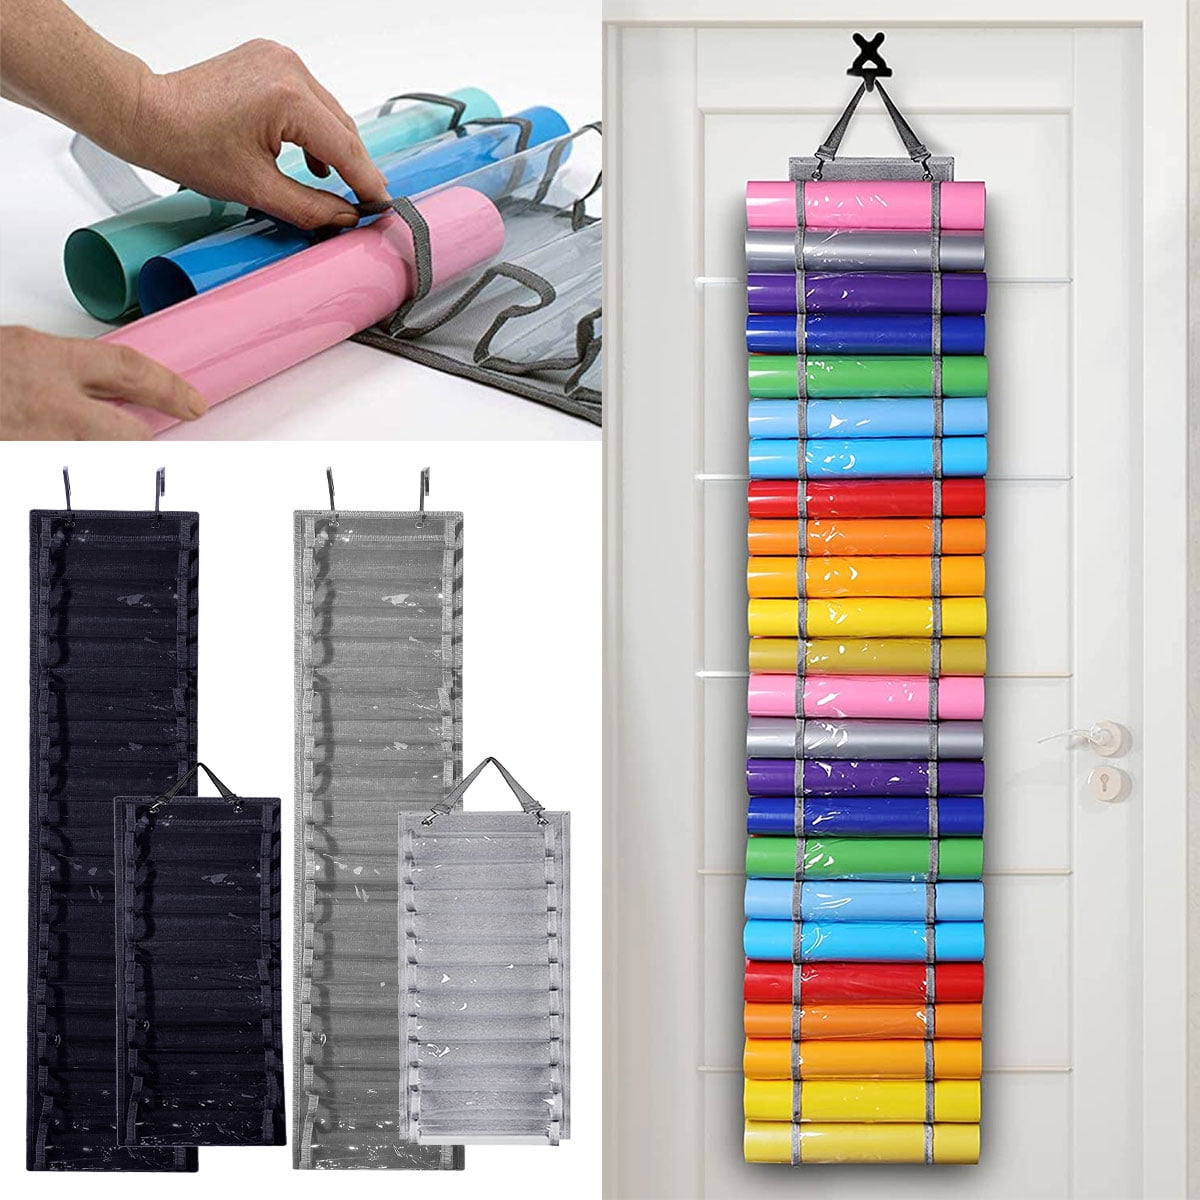 Vinyl Roll Organizer, 24 Slots Vinyl Storage Holder Rack Craft Over The  Door Hanging Bag For Heat Transfer Paper, Wrapping Paper, Cross Stitch  Embroid